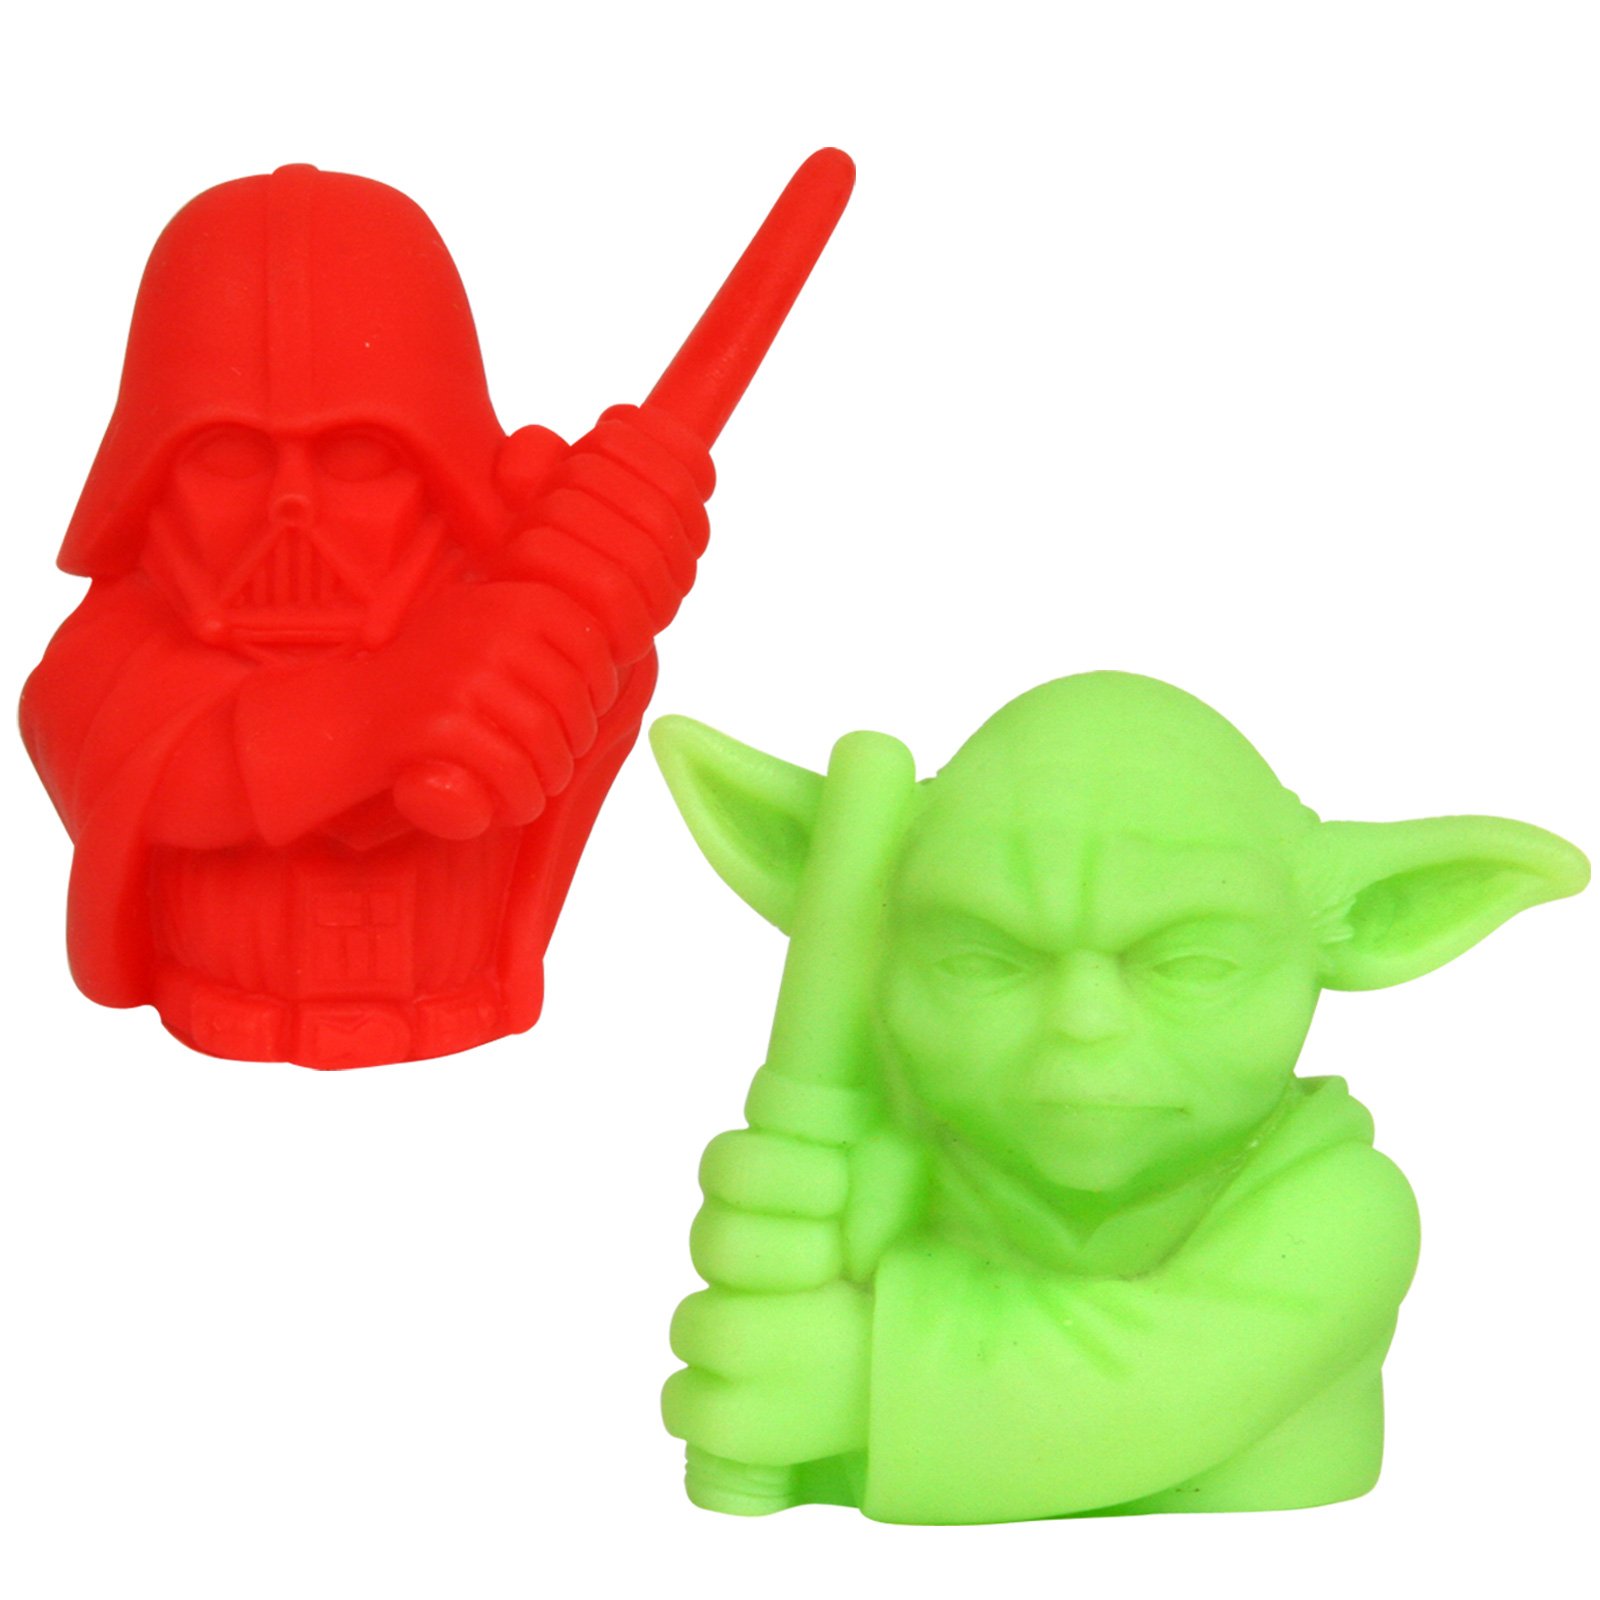 Star Wars Thumb Wrestlers Asst. (4 count) - Click Image to Close